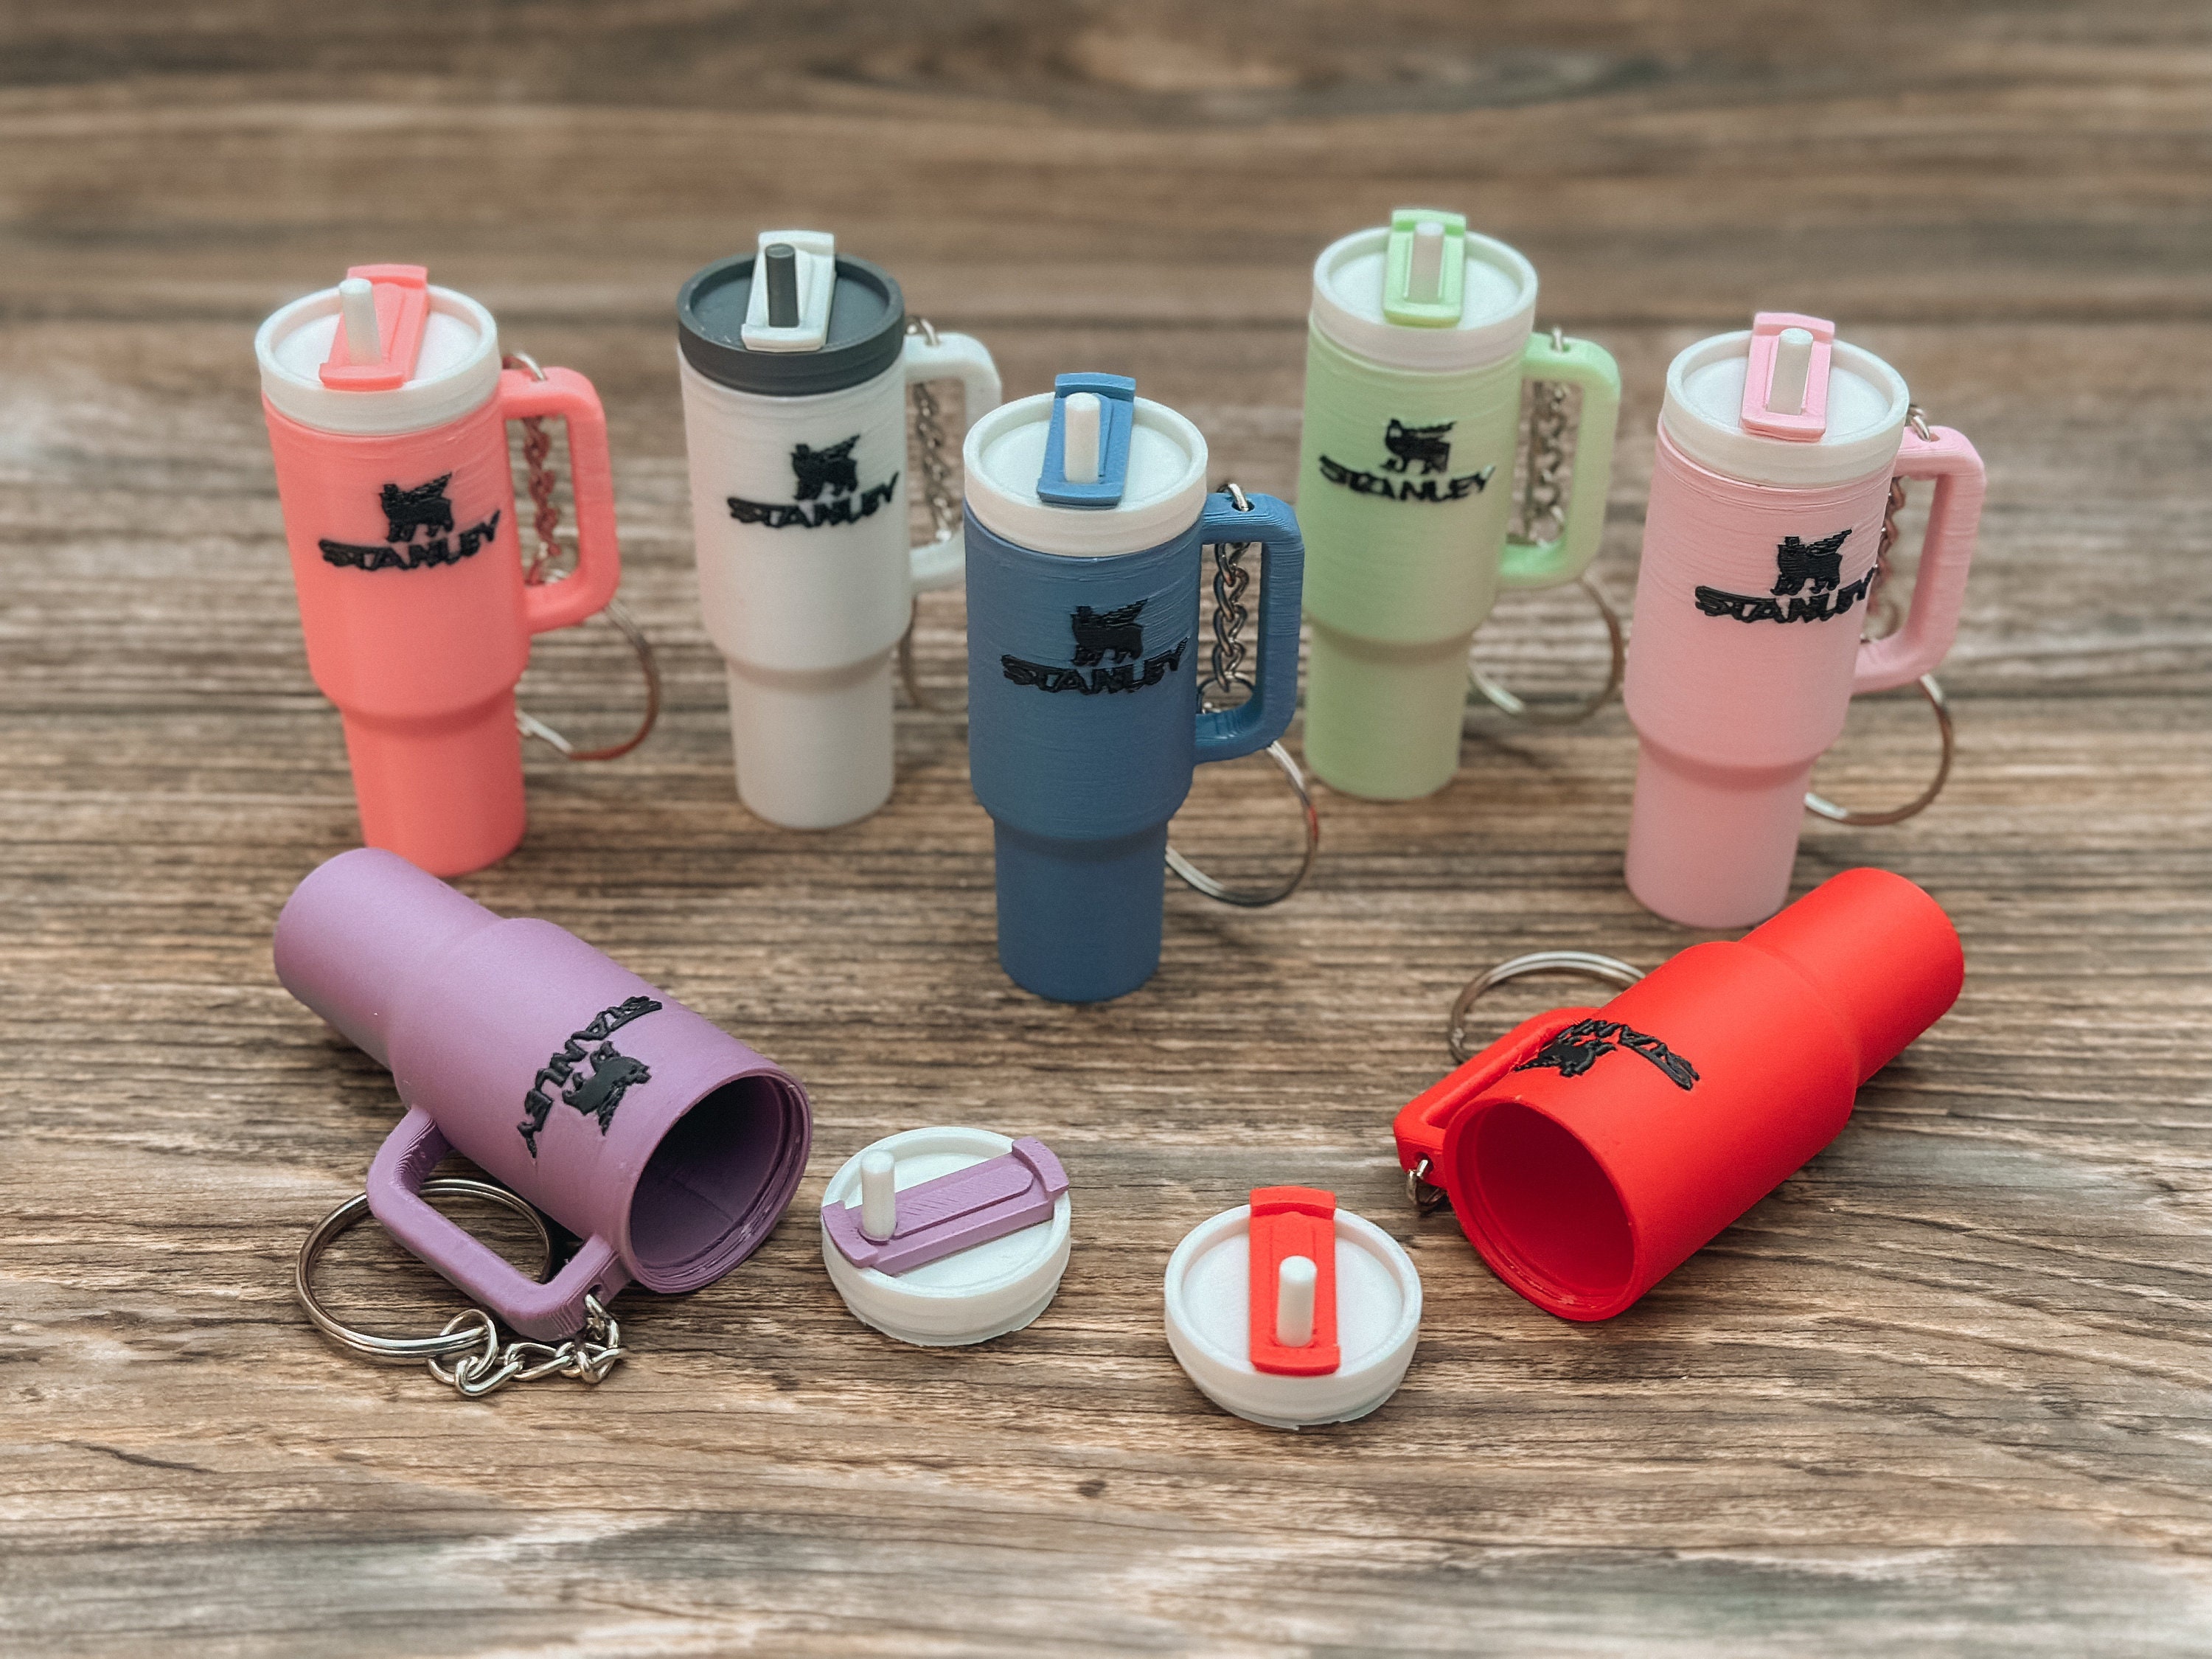 Cute Silicone Cloud Straw Covers Letter Charms for Stanley - Temu